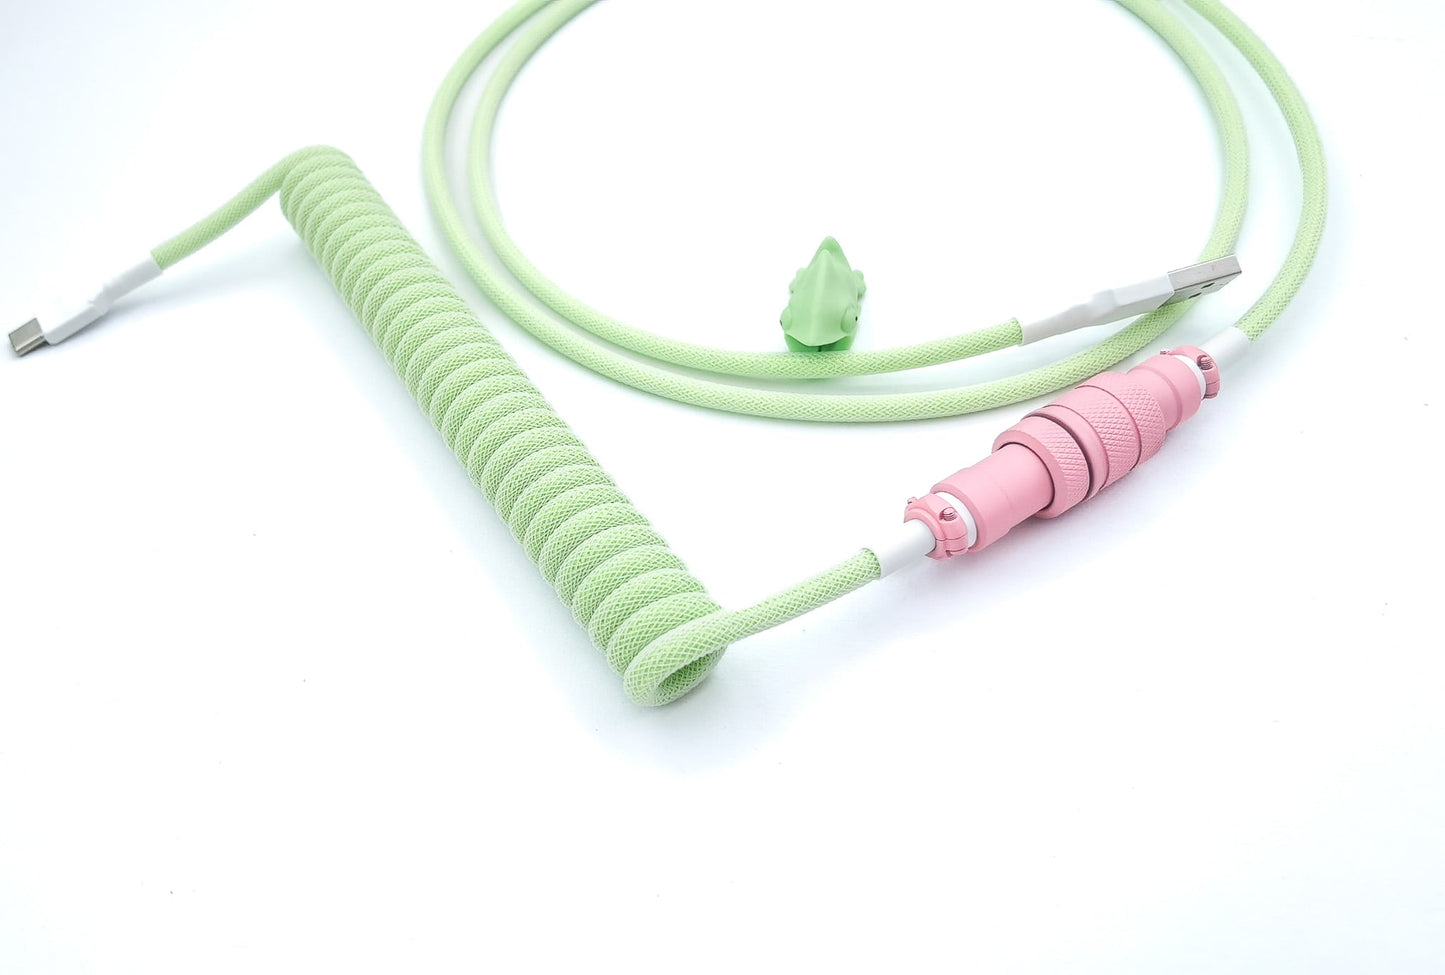 keyboard cable for KAT Mint Chip keycaps